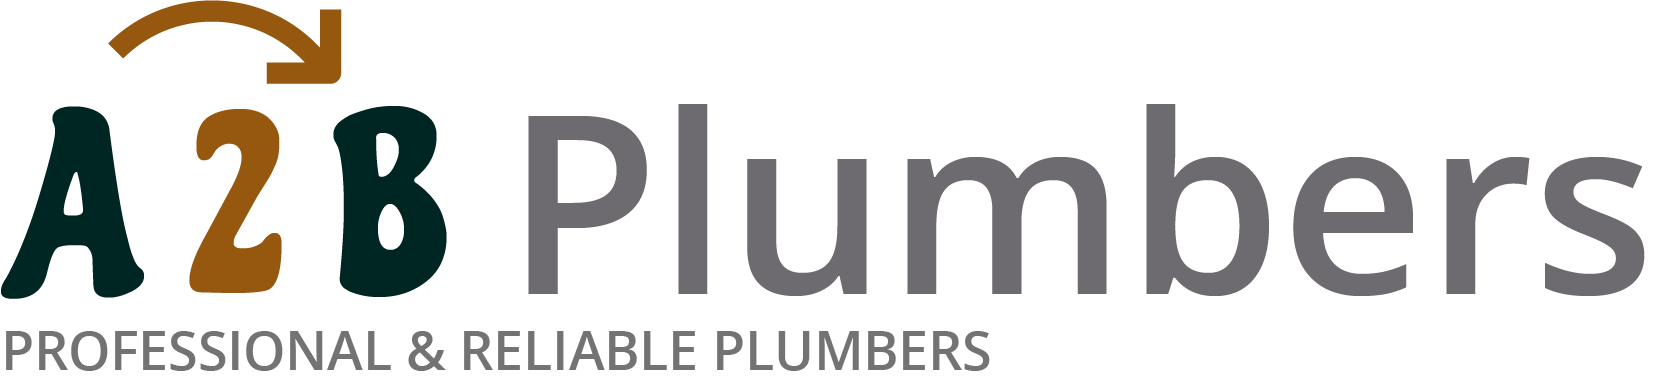 If you need a boiler installed, a radiator repaired or a leaking tap fixed, call us now - we provide services for properties in Banbury and the local area.